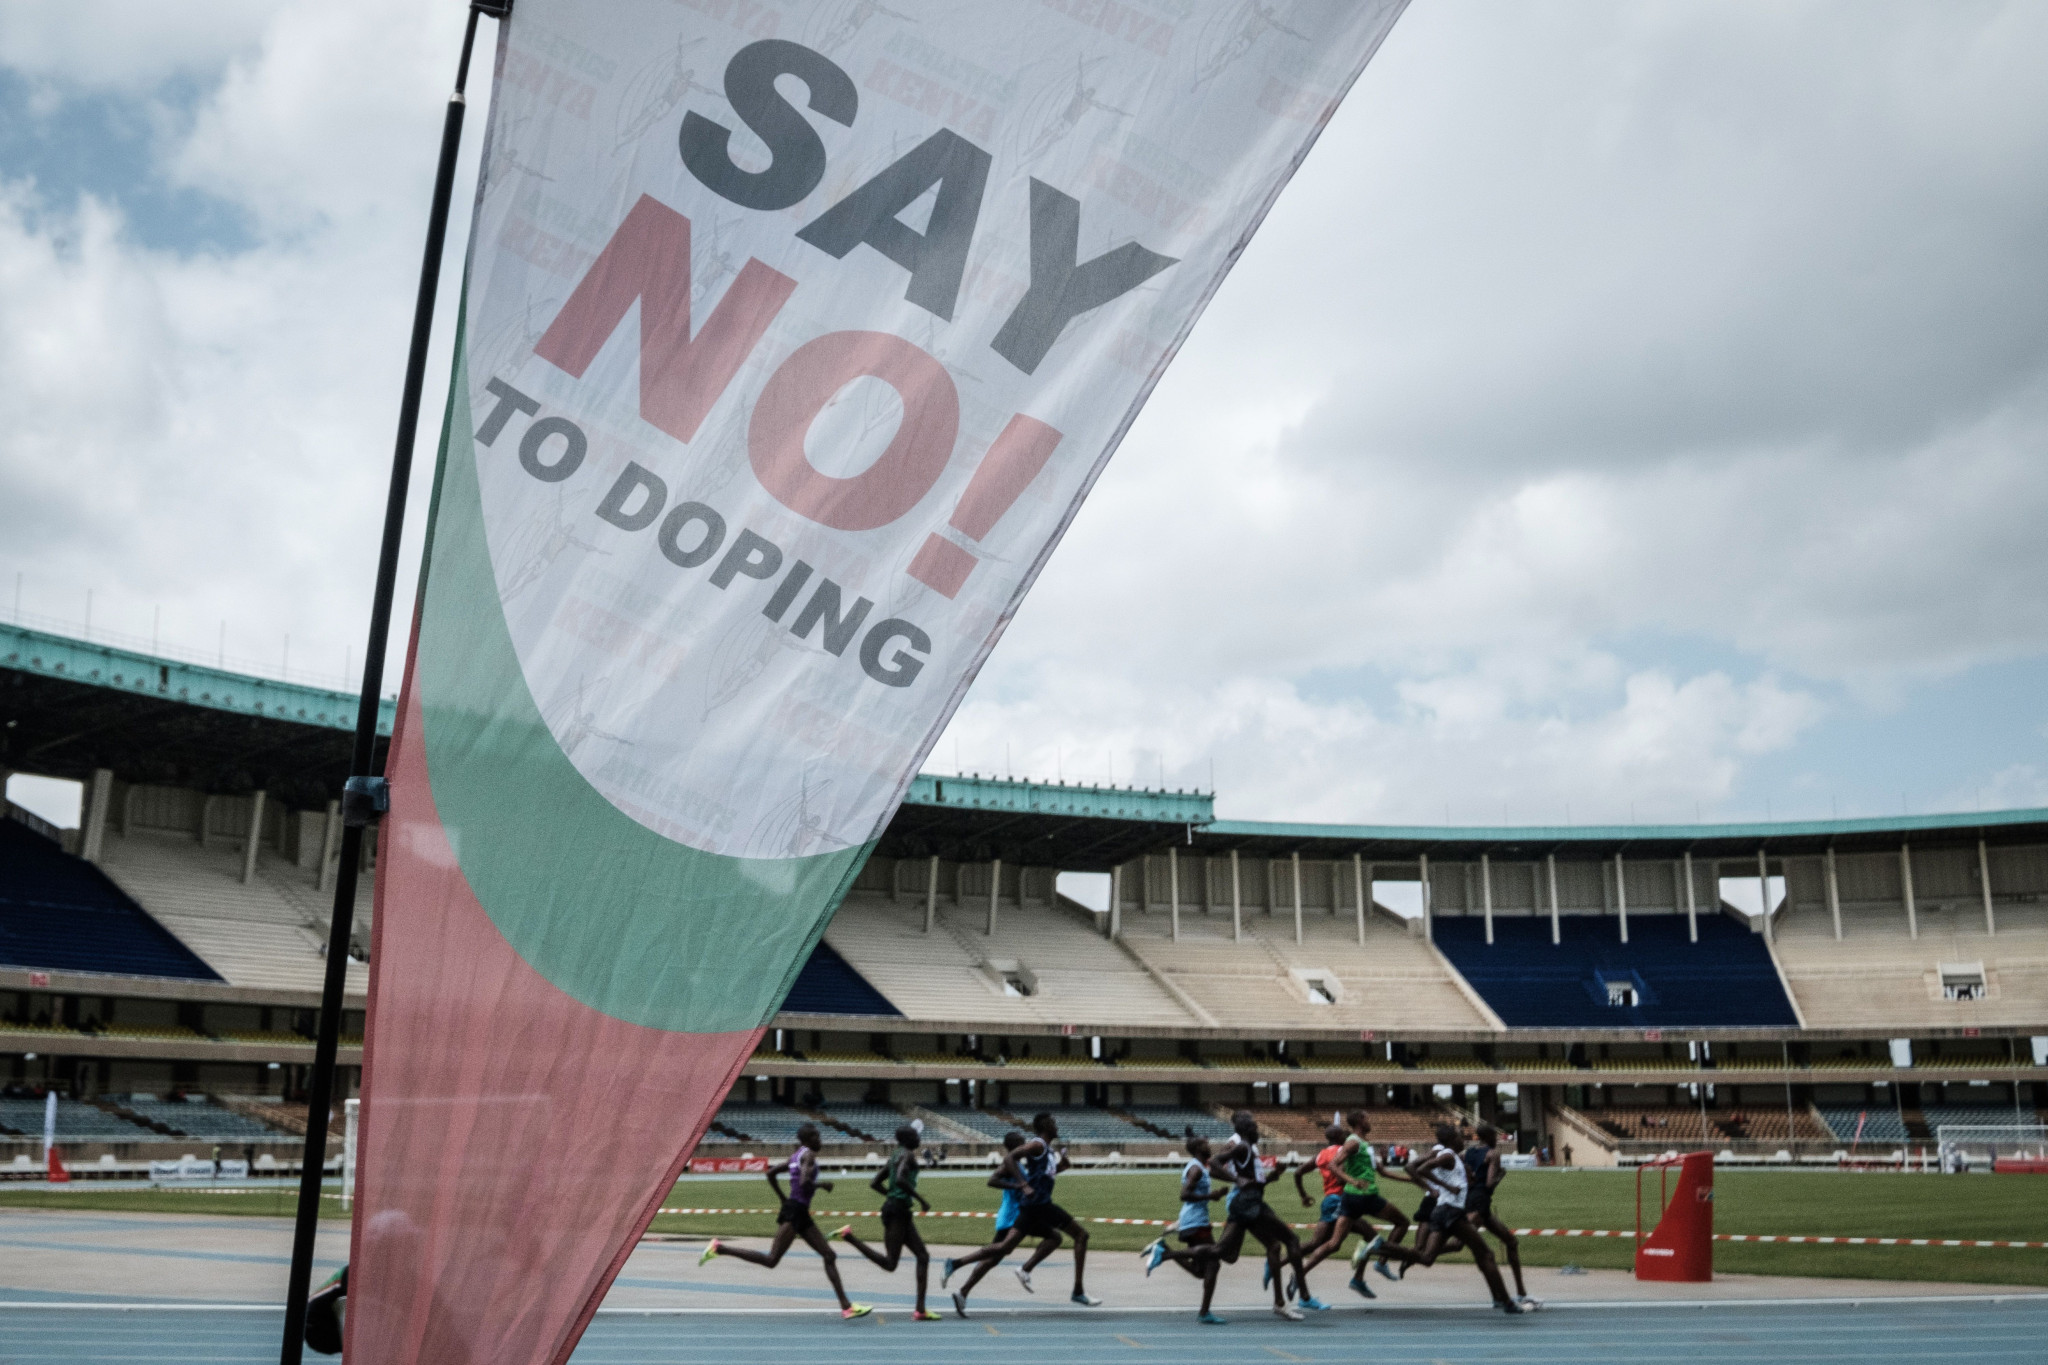 Felix Kipchumba Korir and Emmanuel Saina have been banned for three years following anti-doping rule violations ©Getty Images